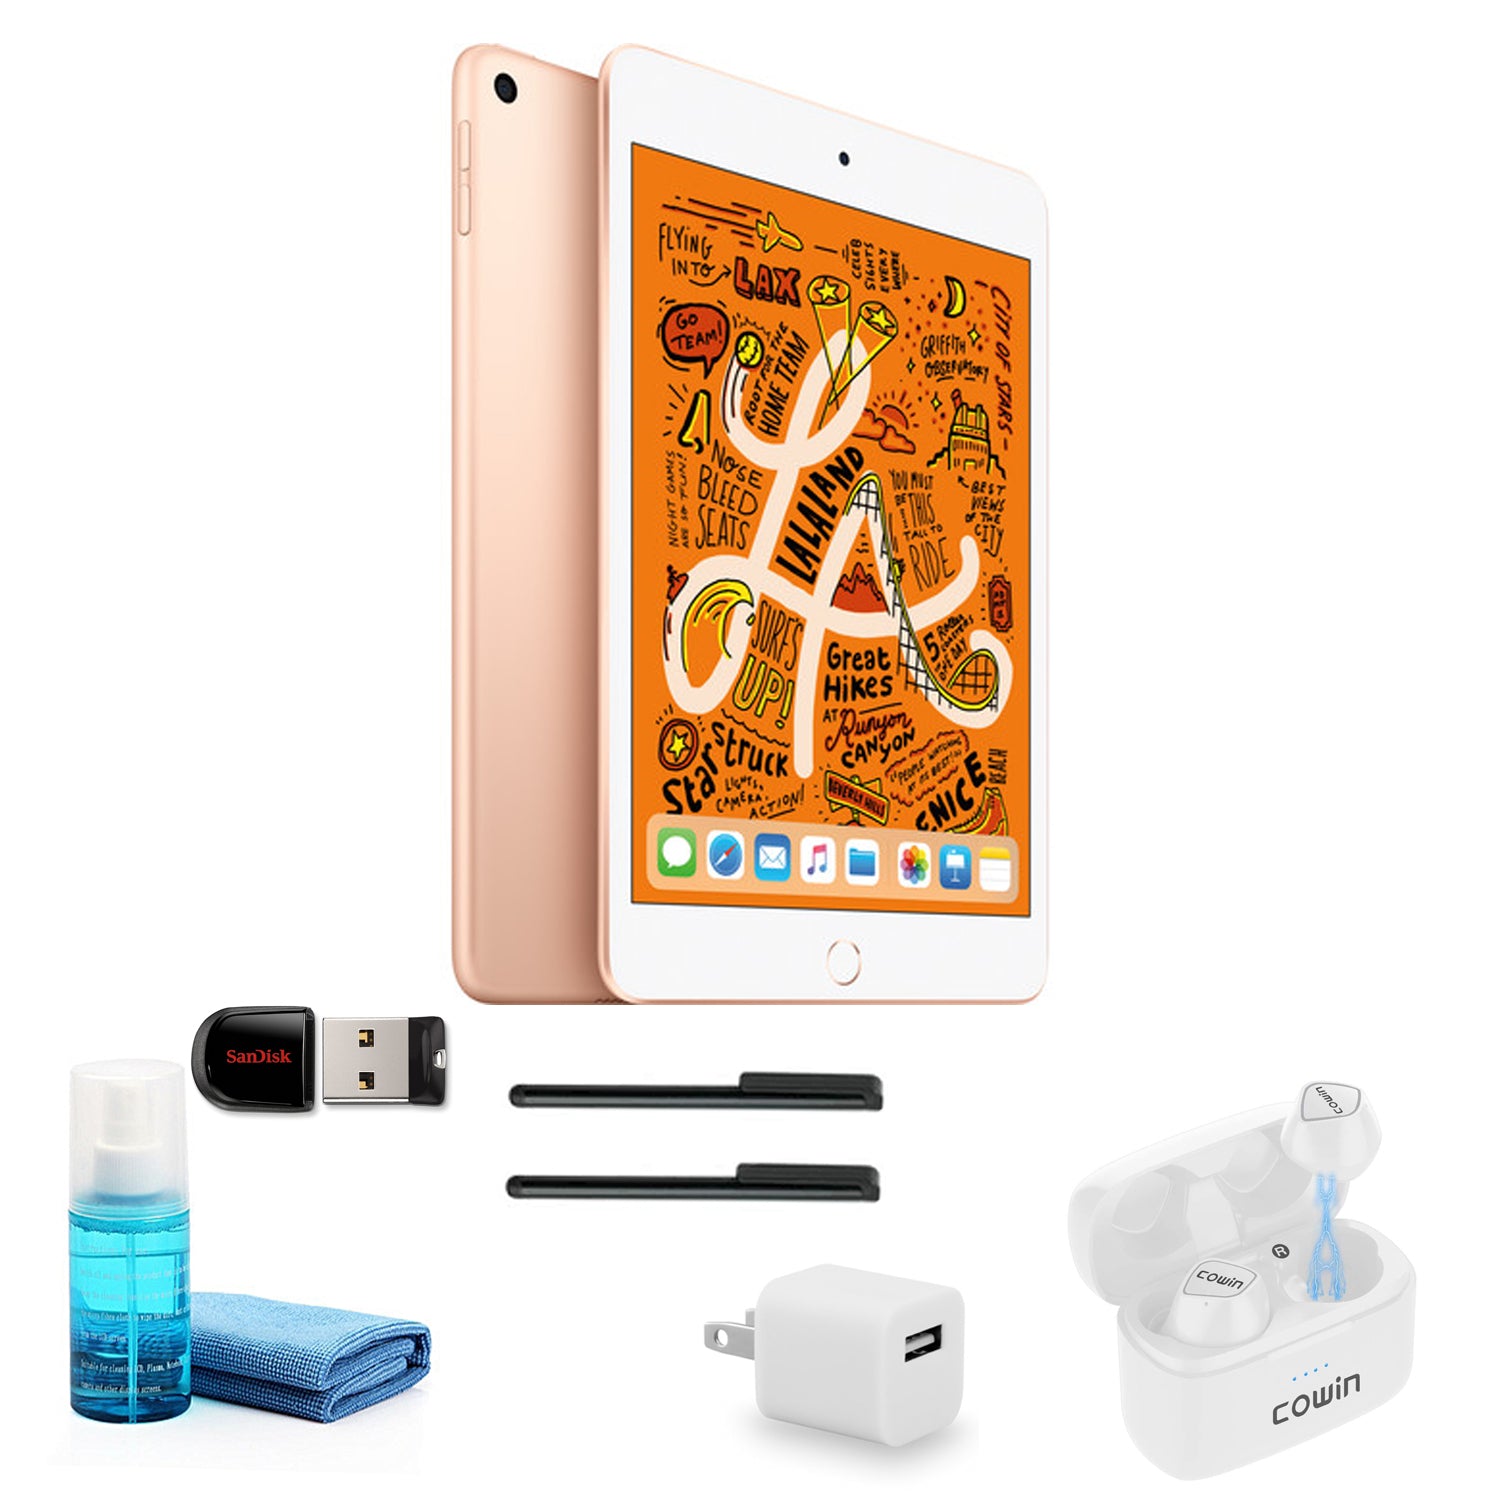 Apple iPad mini 7.9 Inch (64GB, Gold) with White Wireless Earbuds